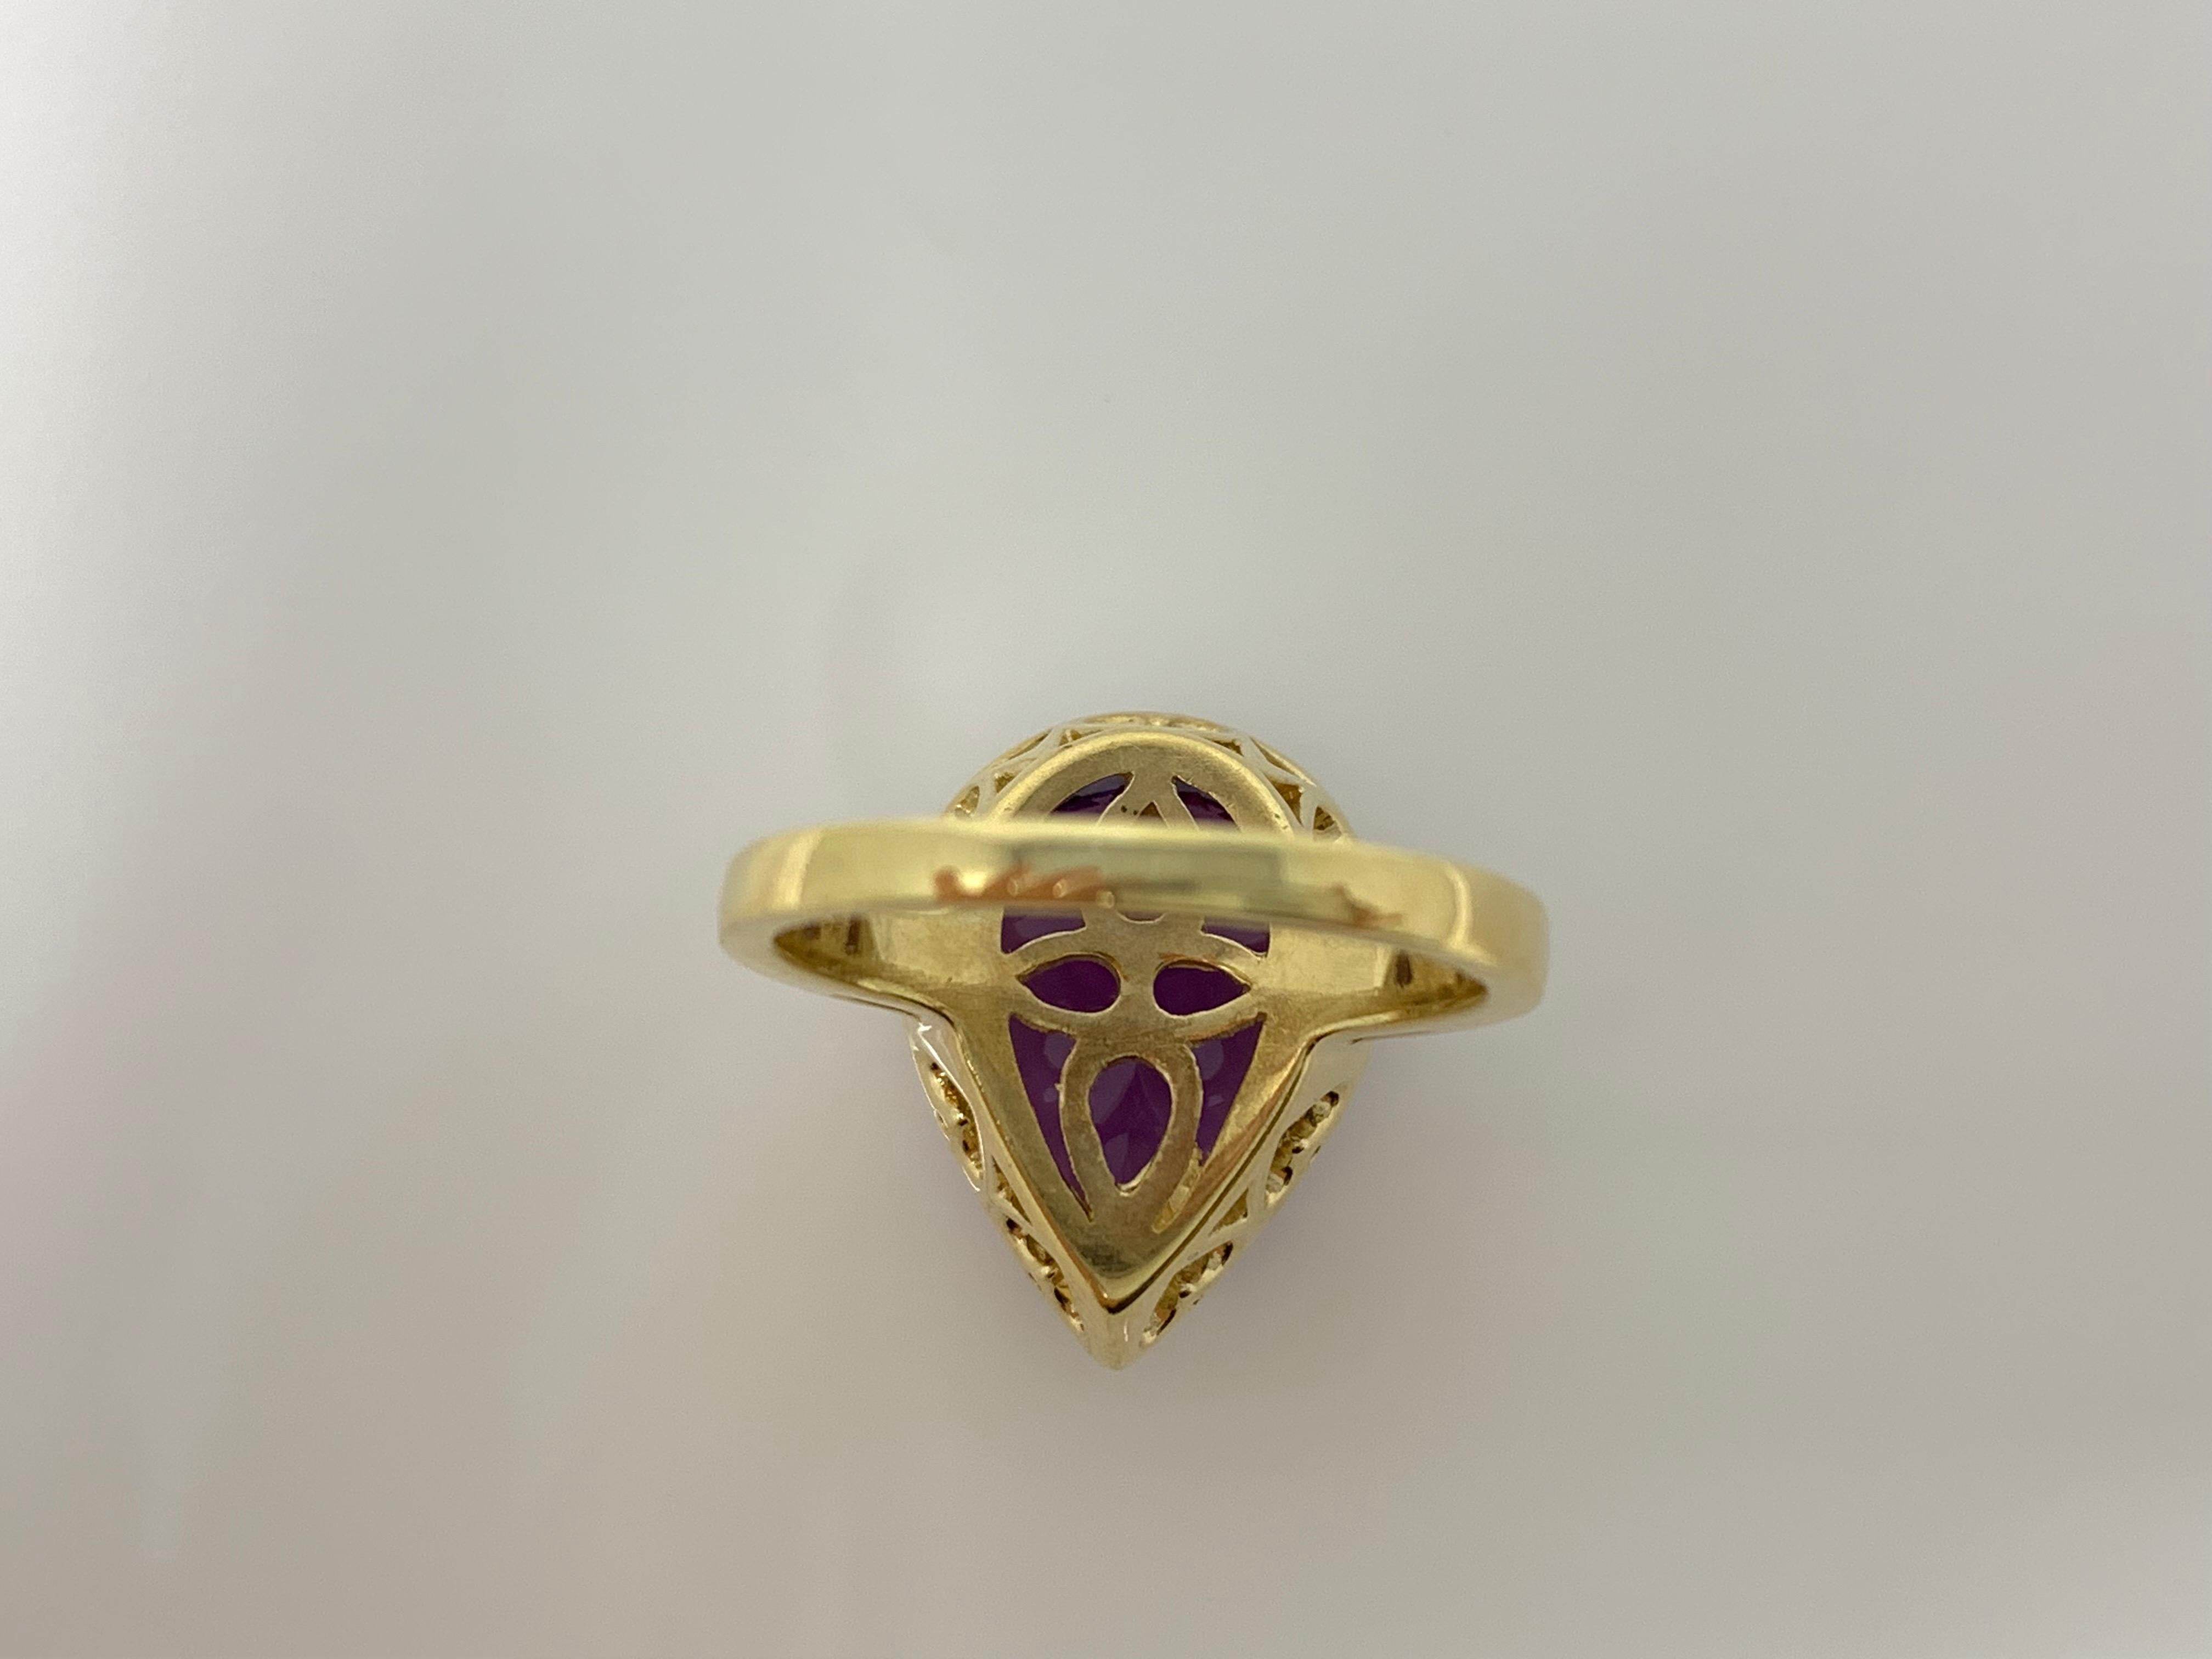 This big and dramatic Amethyst and white diamond ring features a large Amethyst weighing 5 carat in the center with halo of small white diamonds weighing 0.50 carat with VS clarity and GH color. This piece is created by hand in 14k yellow gold and